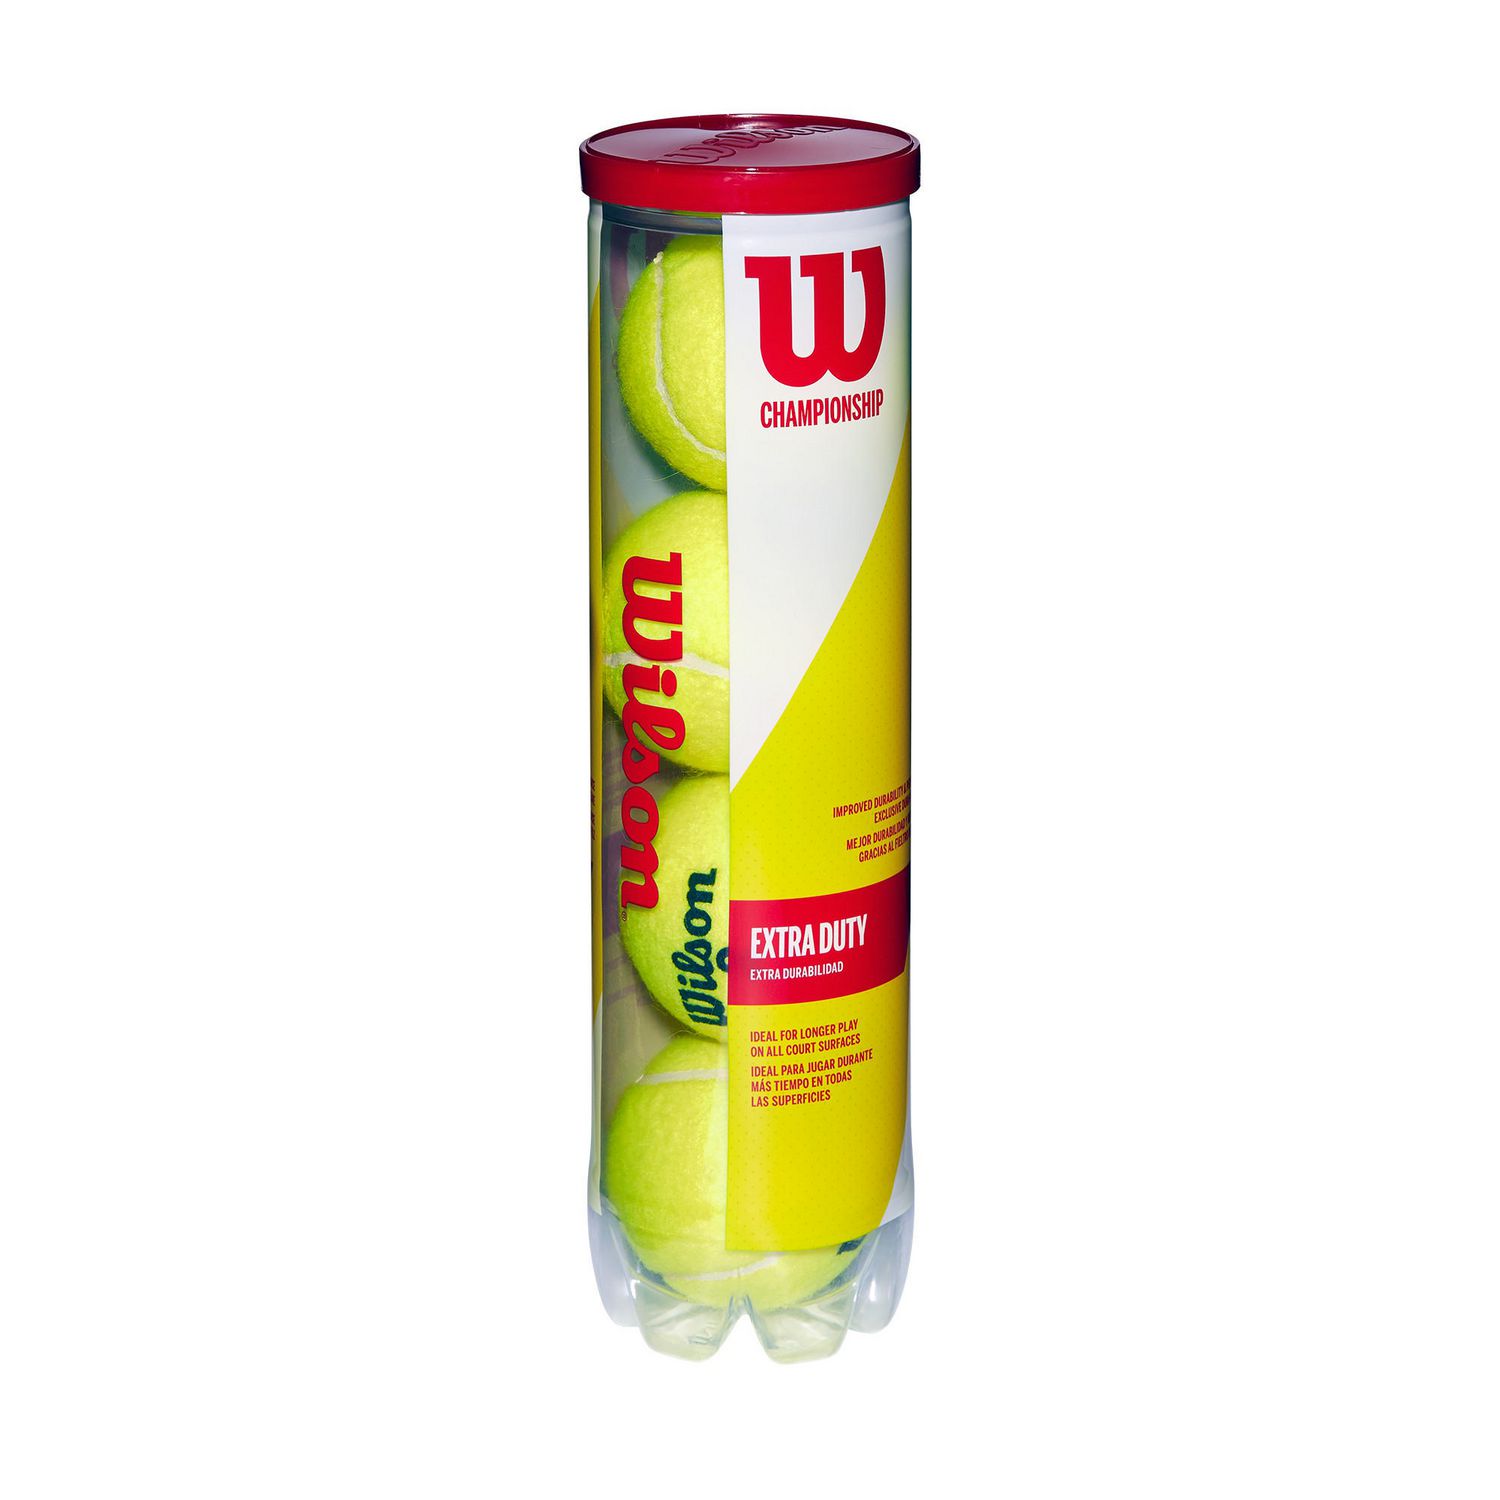 Champ Extra Duty Yellow, Wilson Tennis Balls 4-Pack Can for All Surfaces 